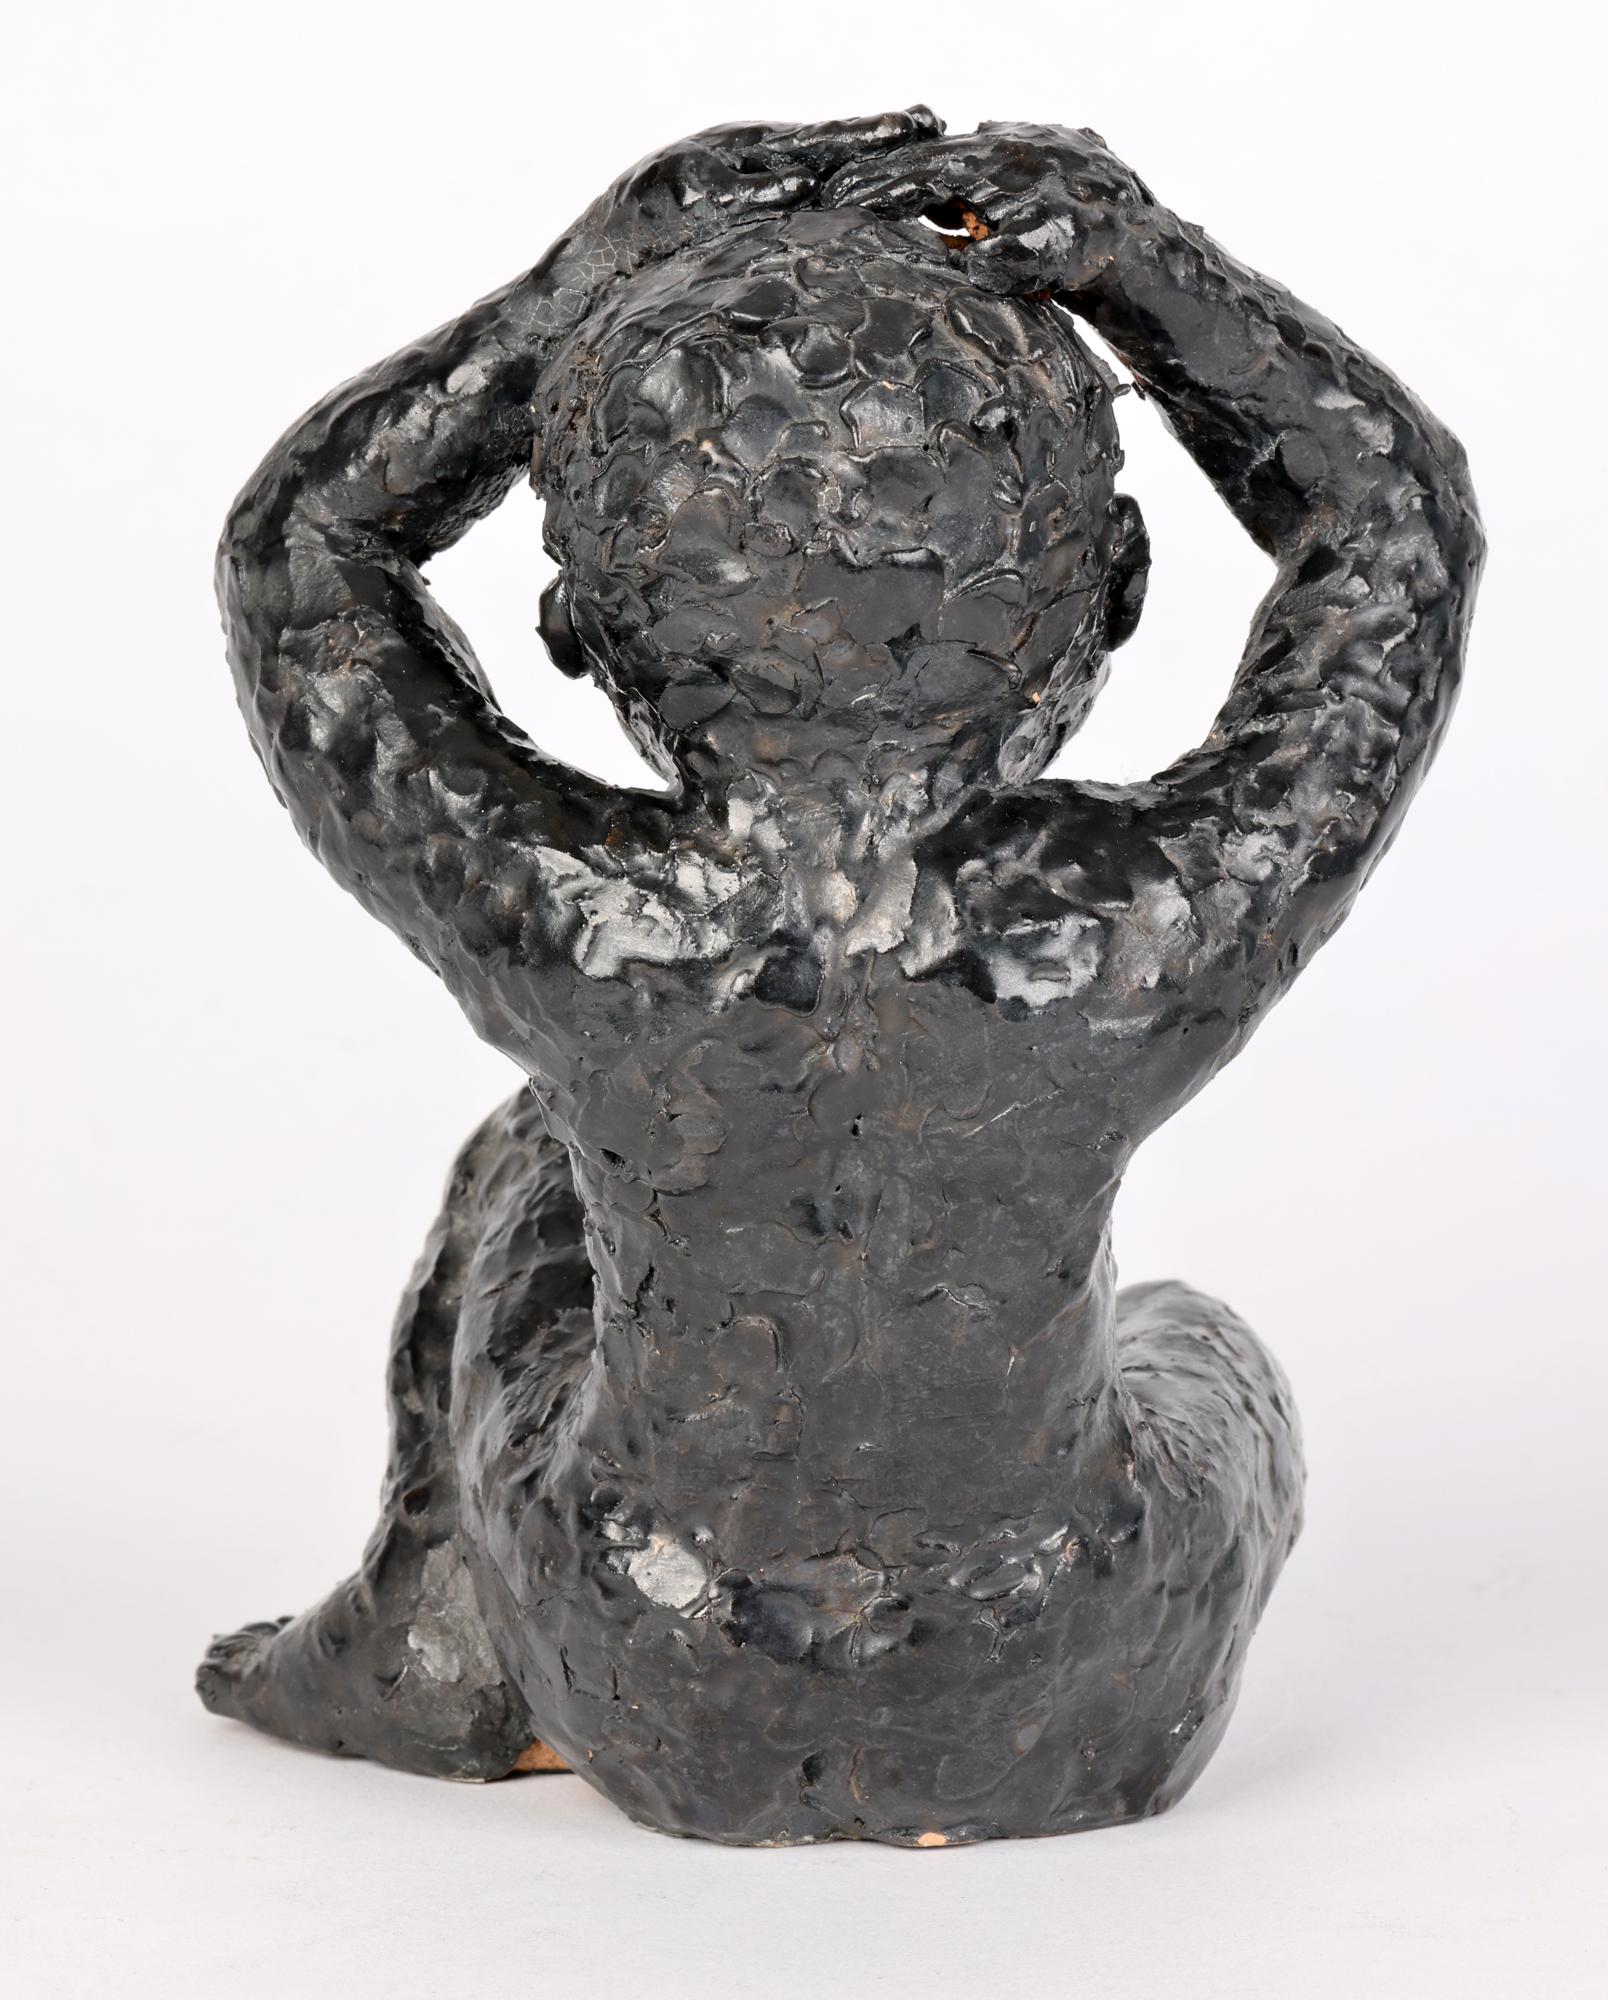 George West Studio Pottery Black Glazed Seated Child Sculpture Dated 1969 For Sale 2